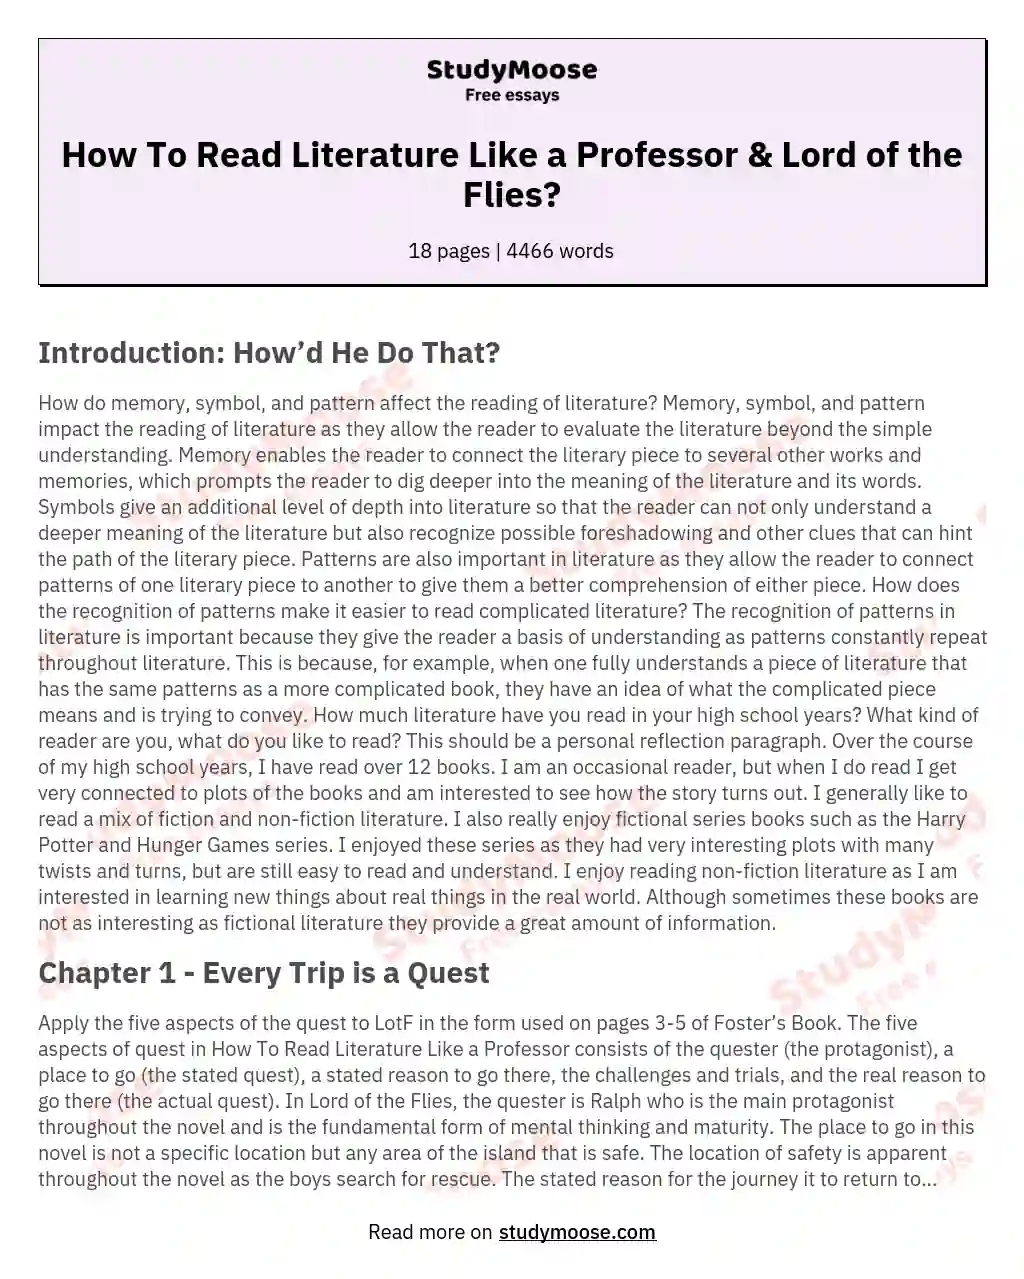 How To Read Literature Like a Professor & Lord of the Flies? essay